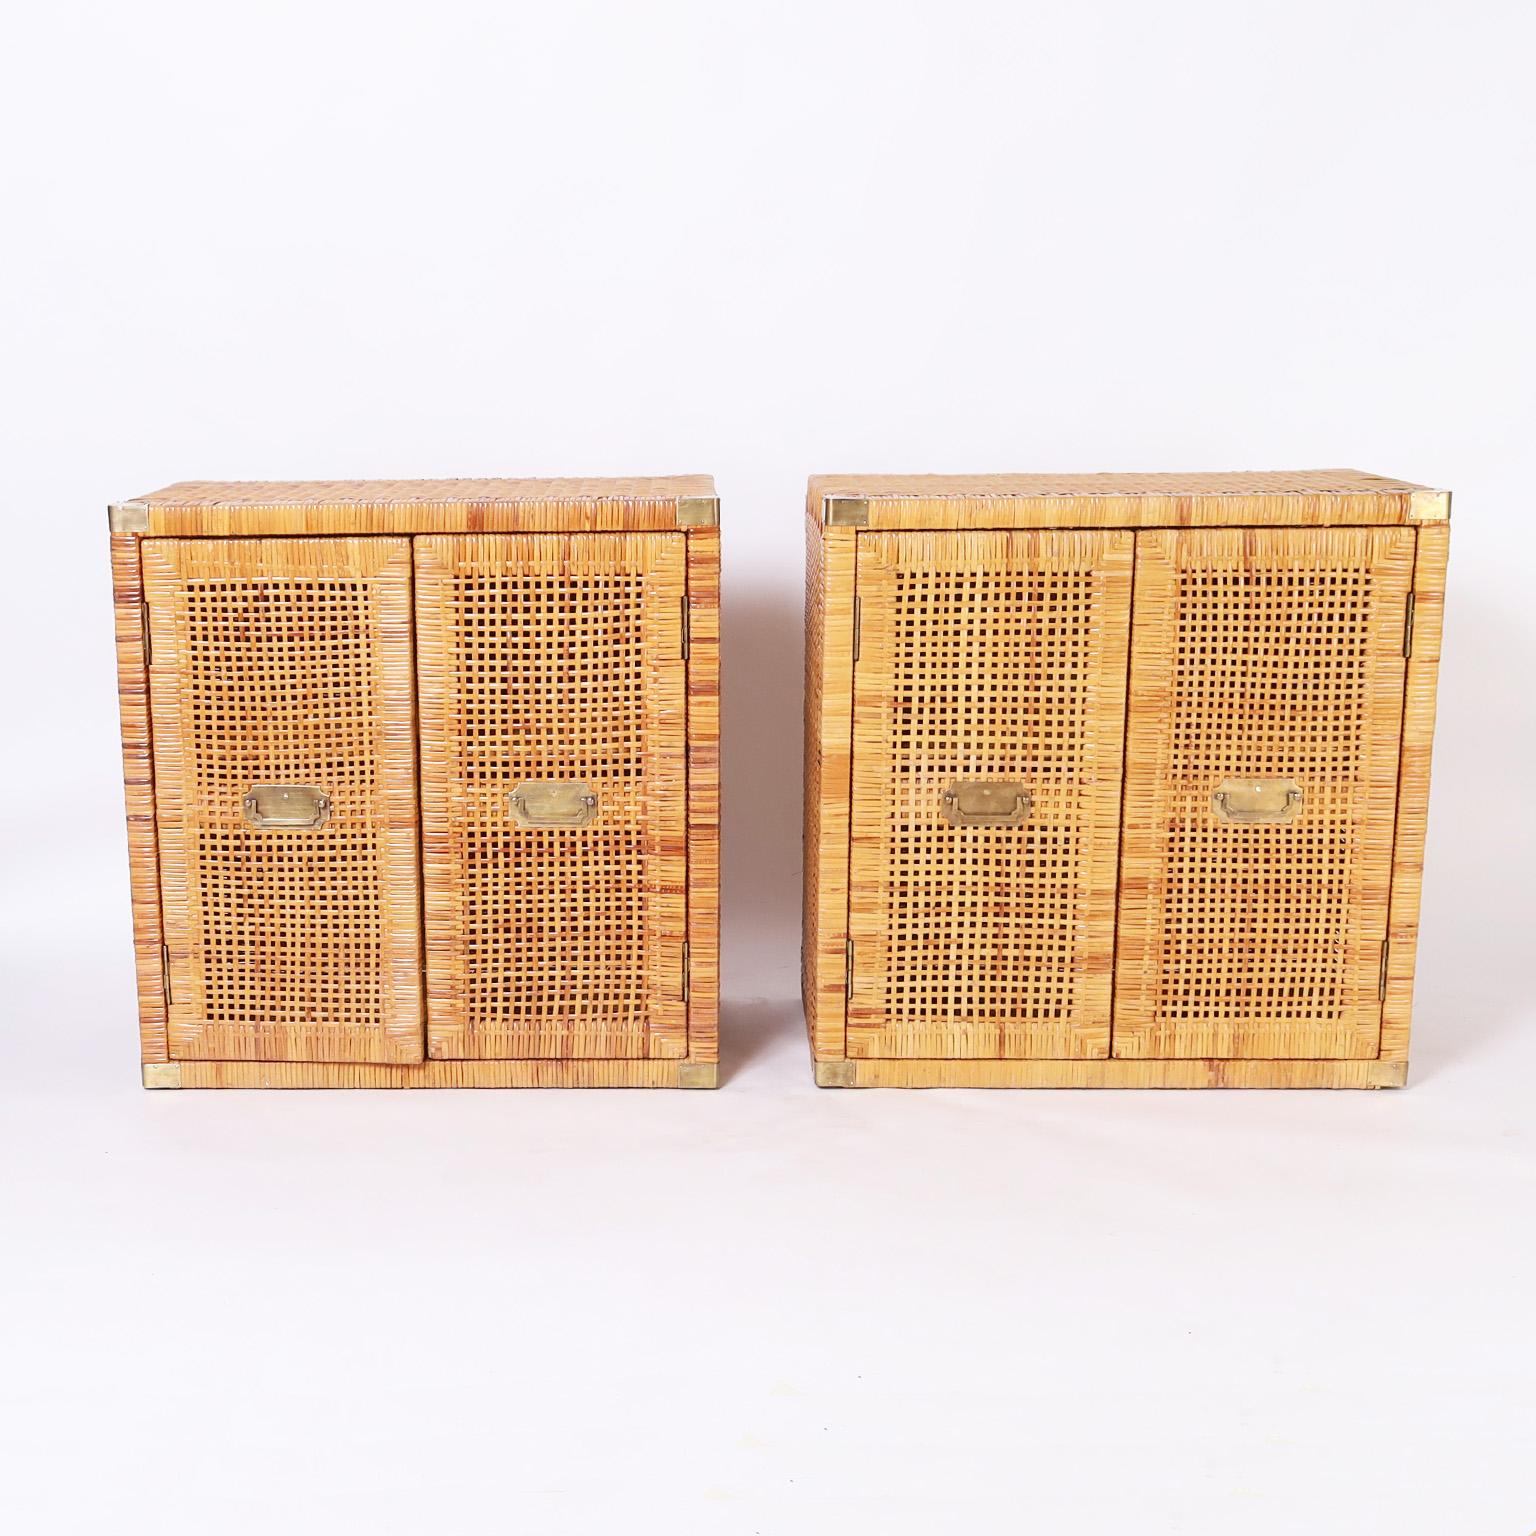 Impressive pair of vintage Bielecky Brothers stands hand crafted in woven reed in a campaign style with brass hardware, two doors in front, and plenty of storage.